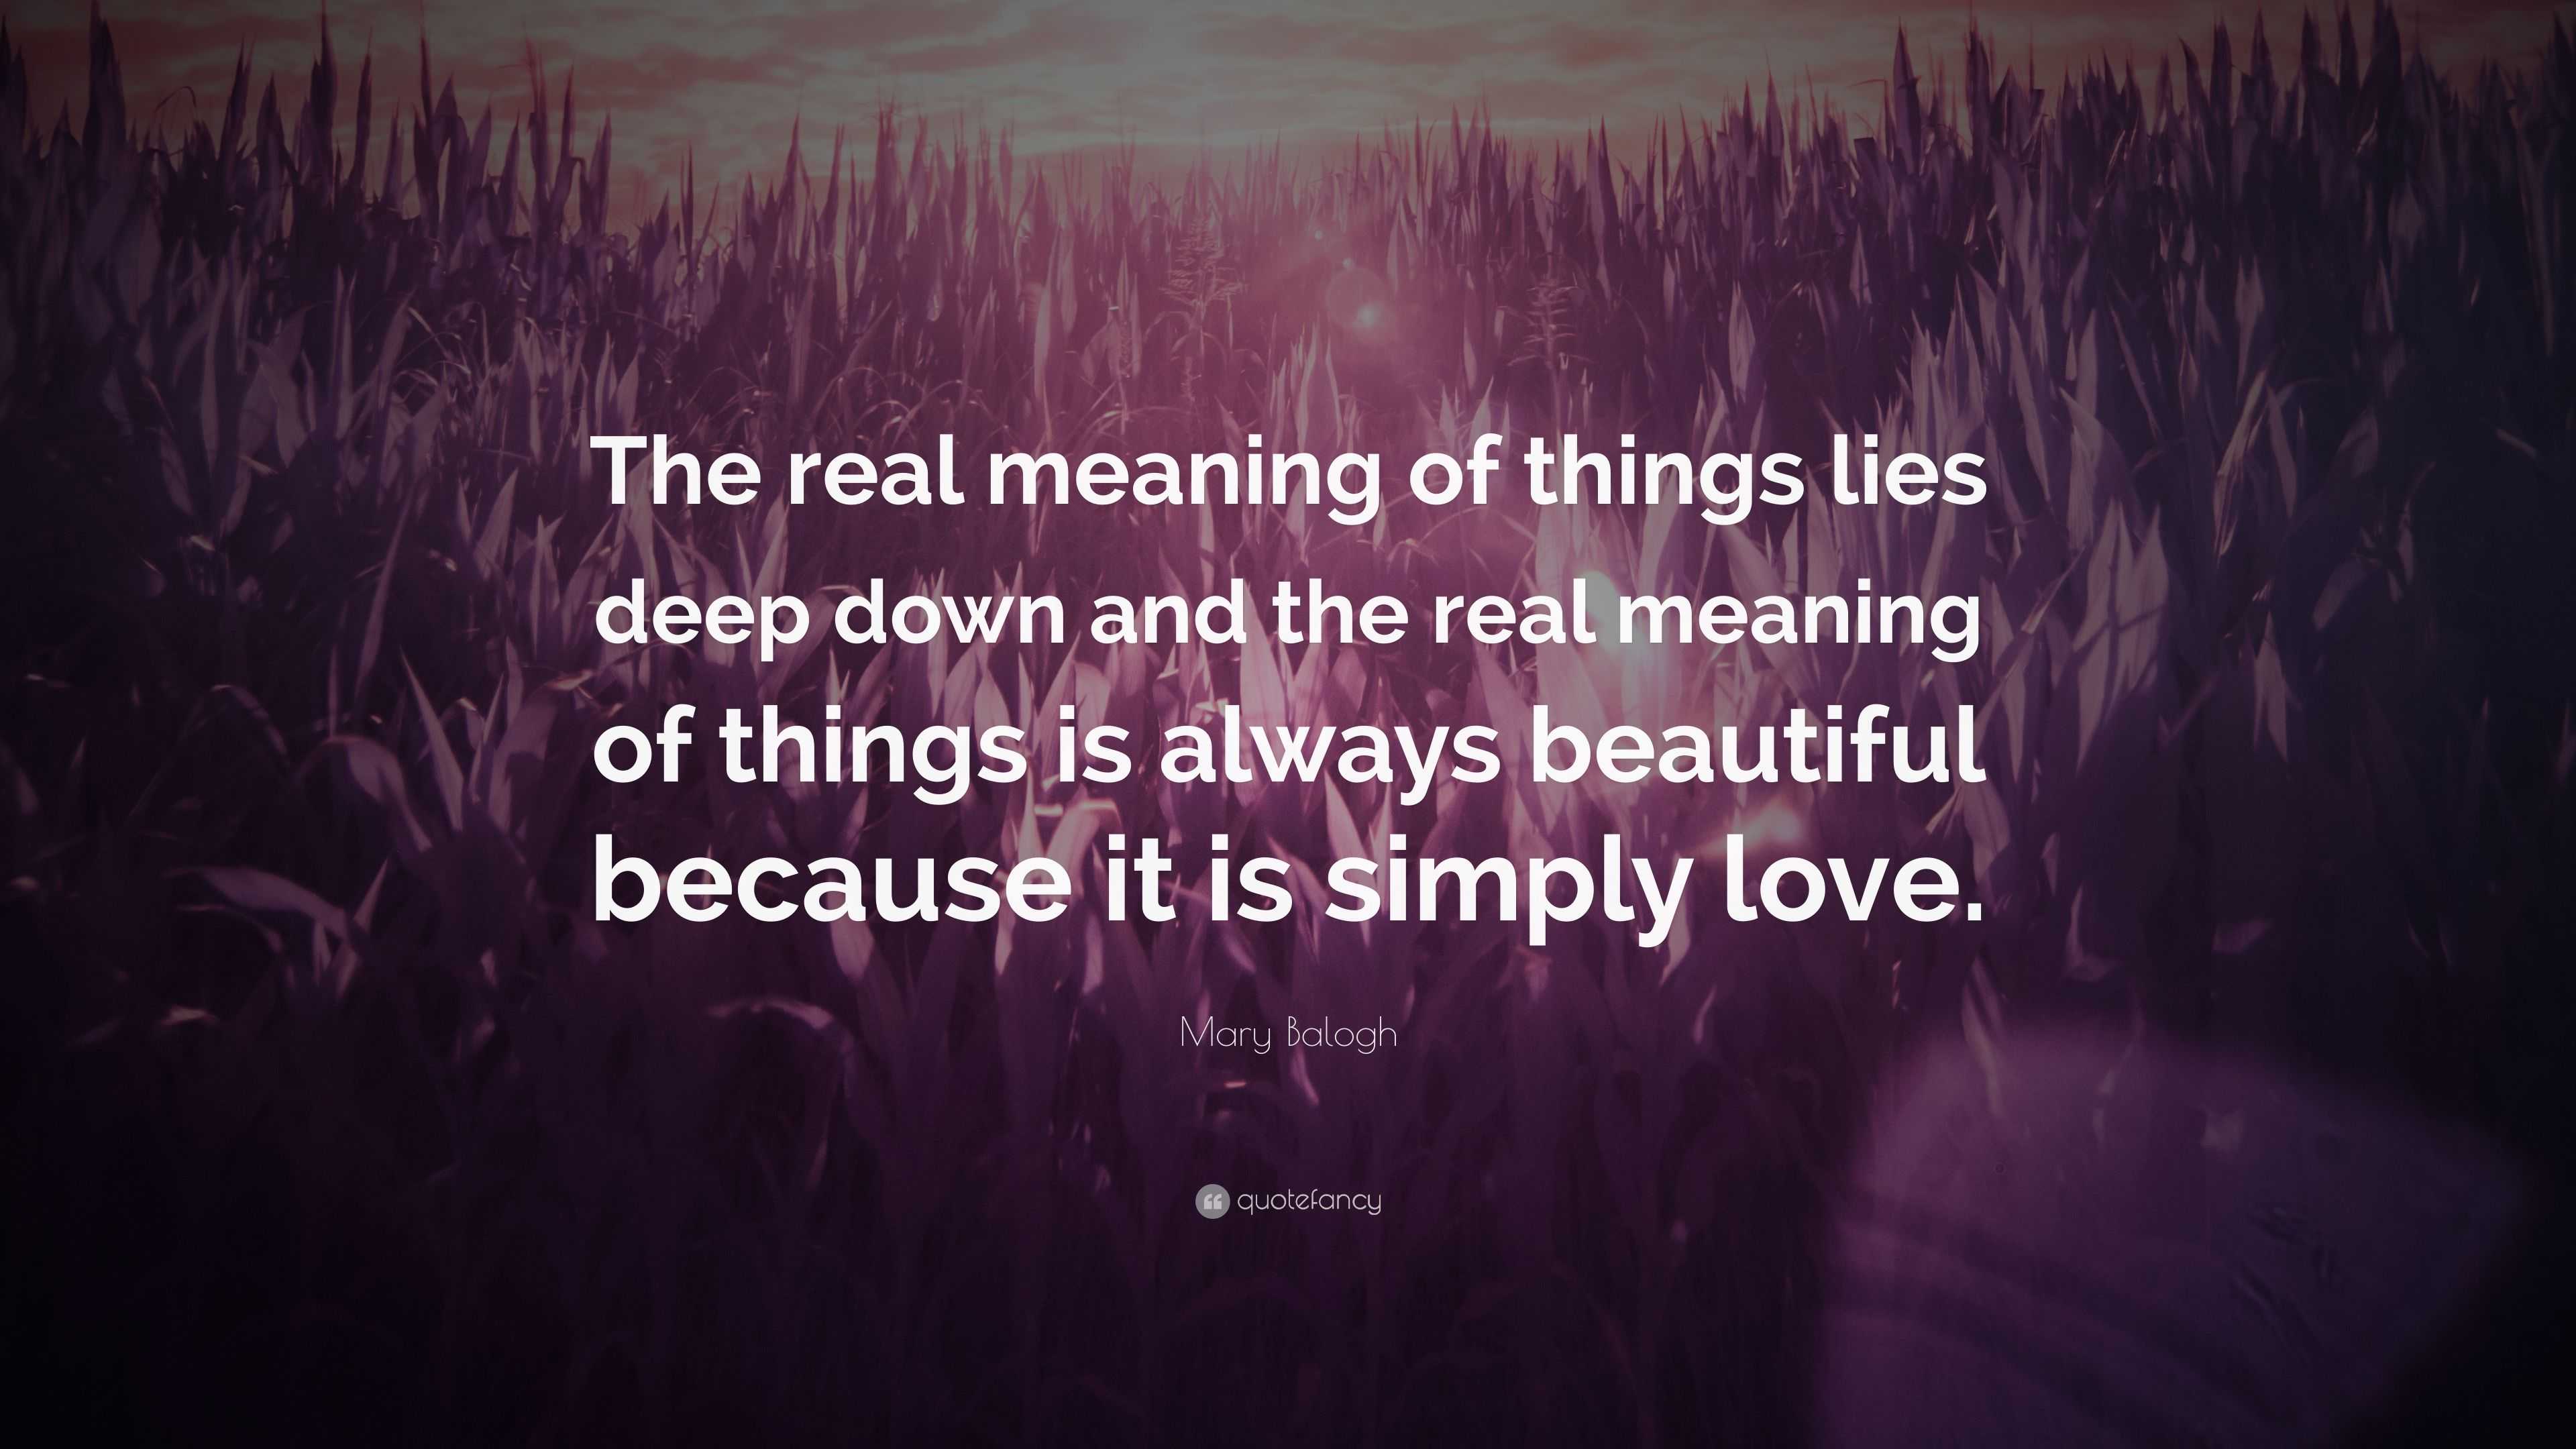 Mary Balogh Quote “The real meaning of things lies deep down and the real